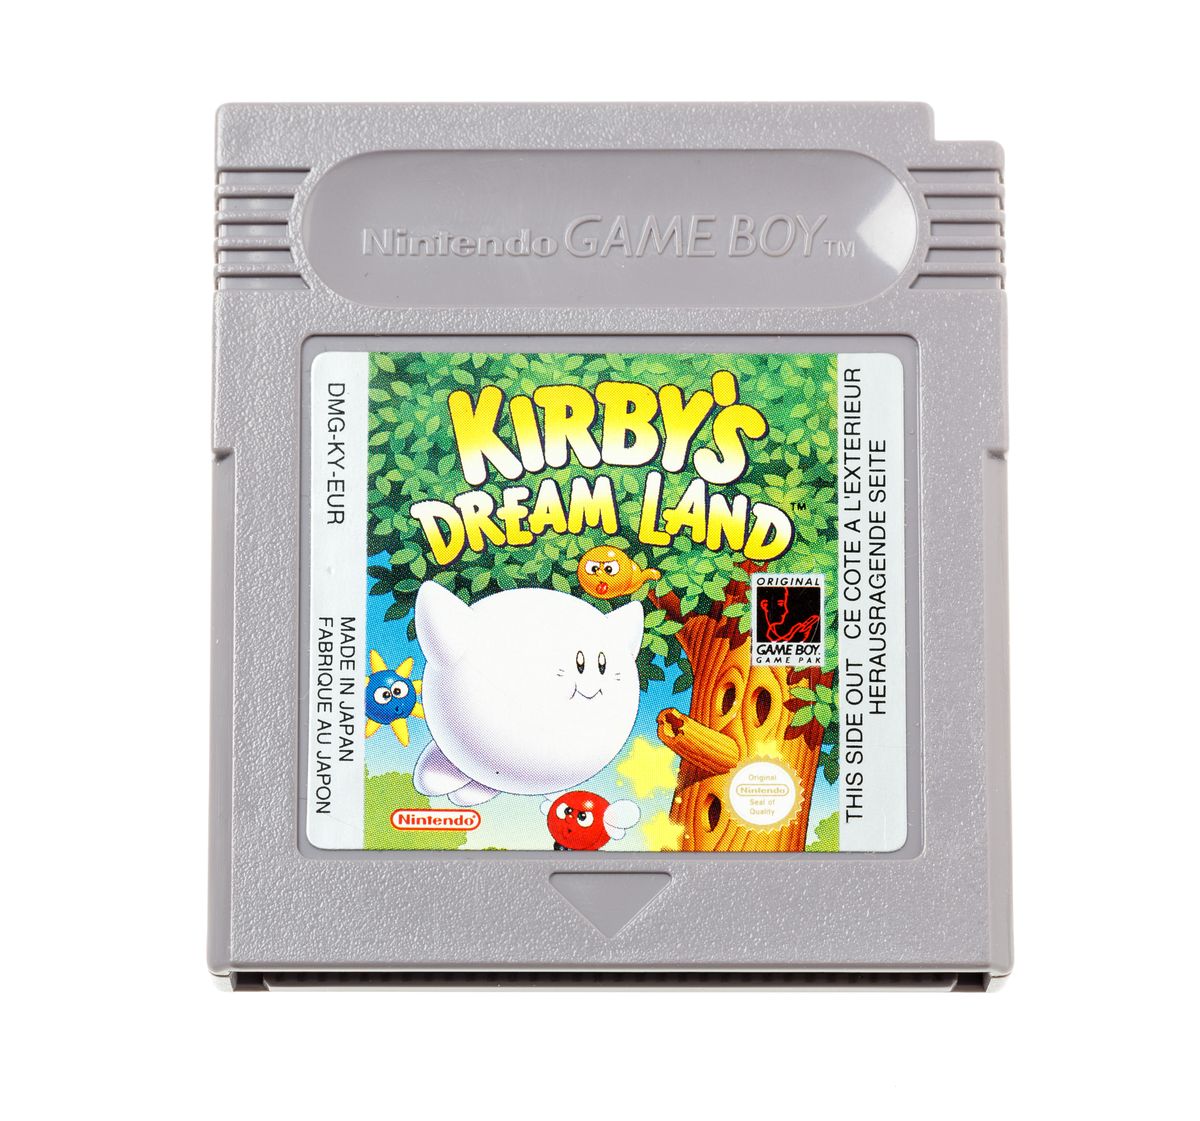 Kirby's Dream Land Kopen | Gameboy Classic Games